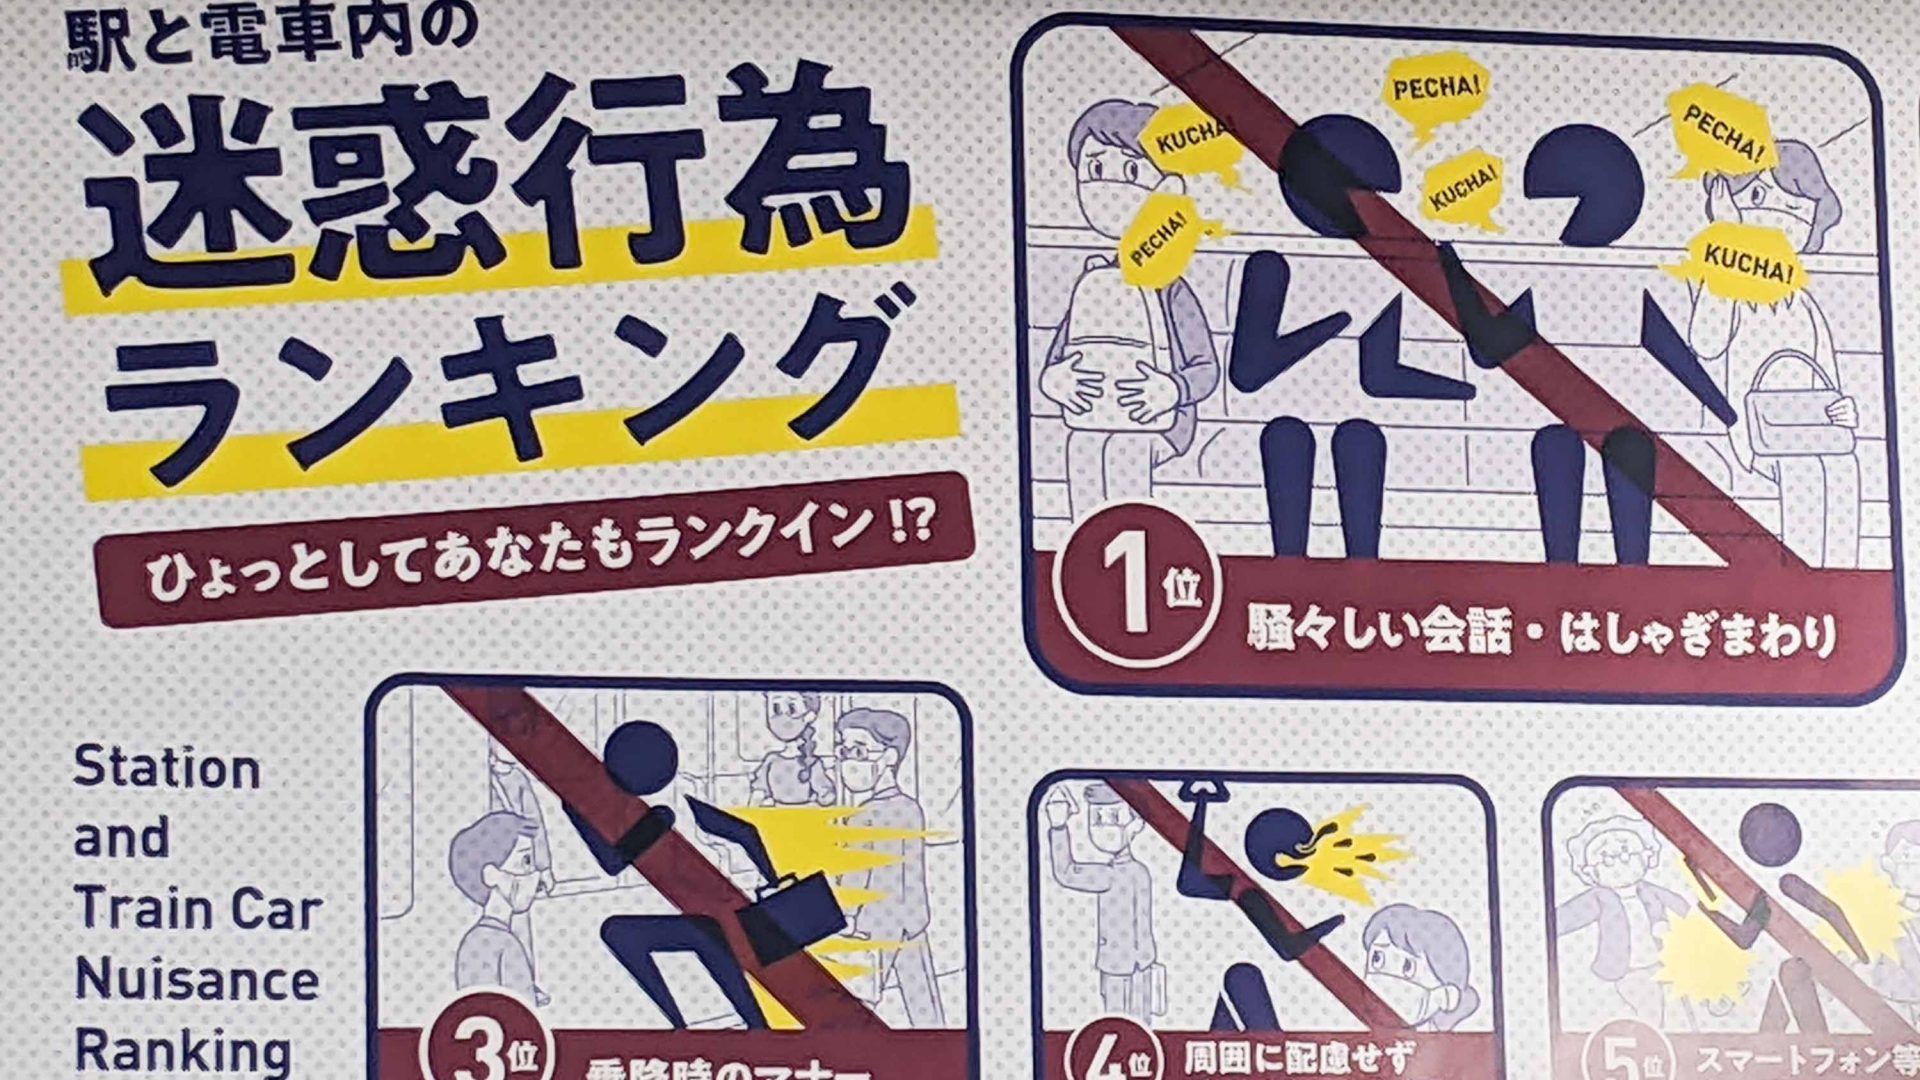 Train signs telling people how to avoid being a nuisance.